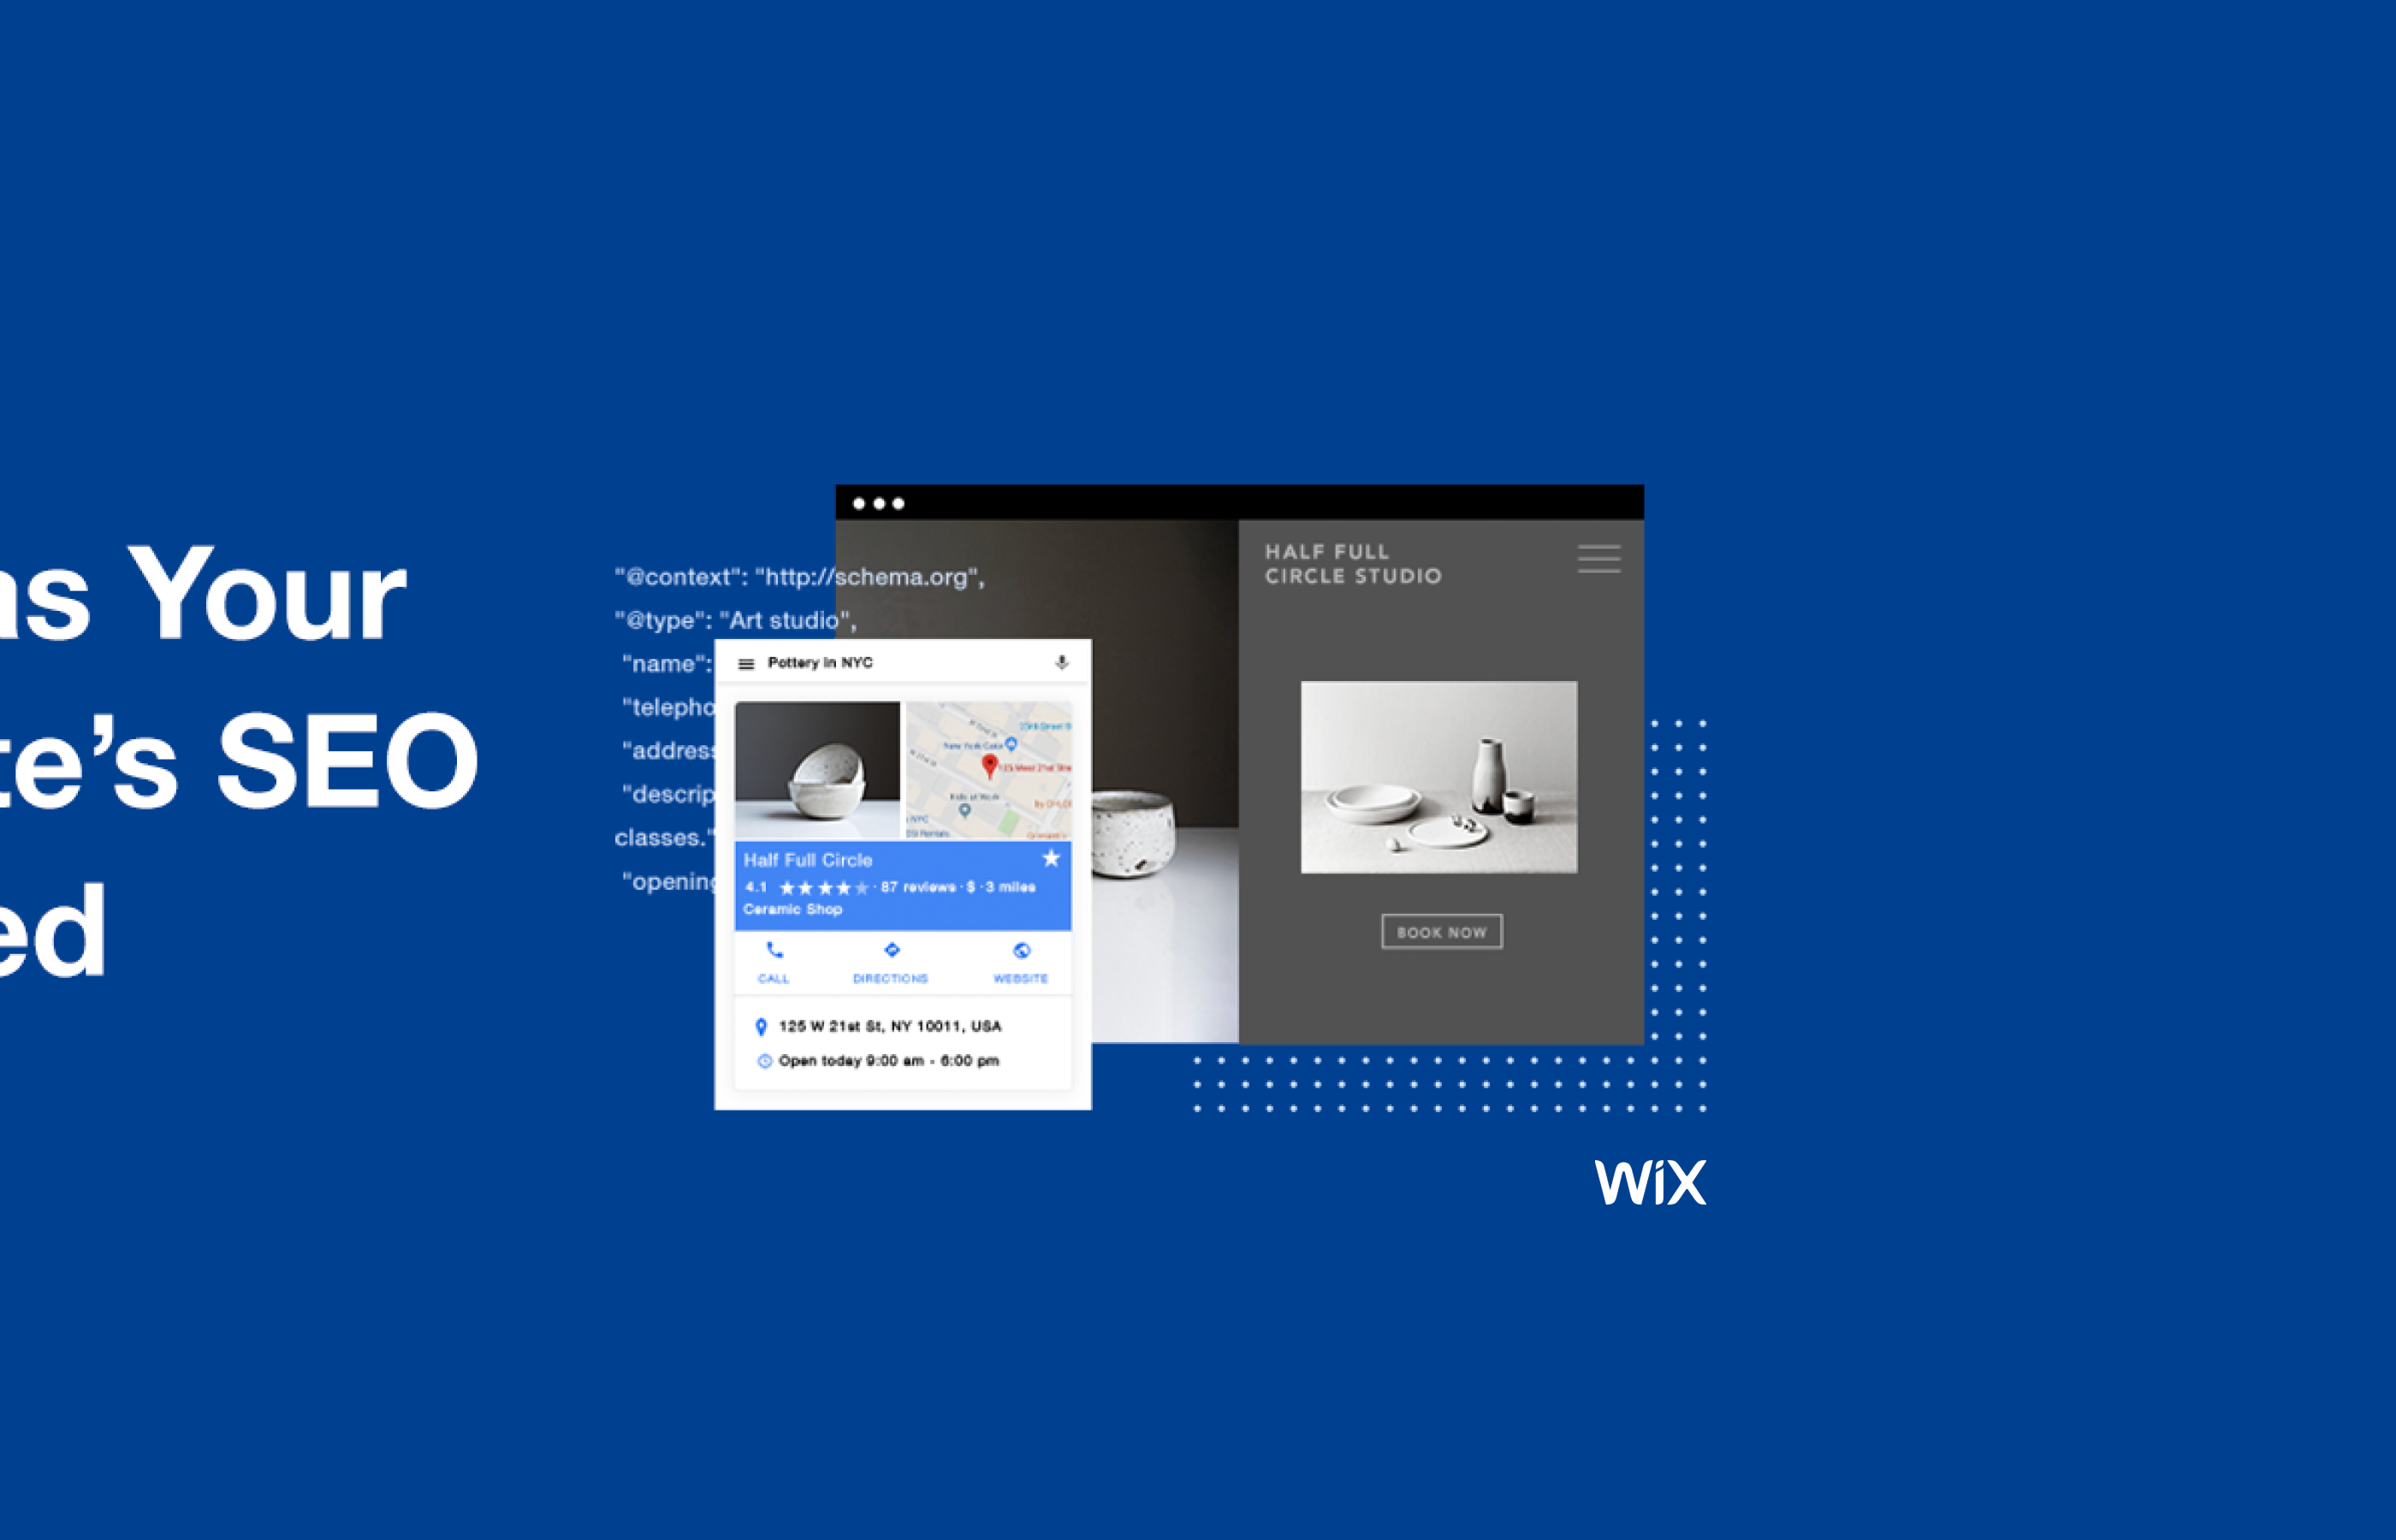 Profile Page screen design idea #271: Get better SEO results for your site with WIX